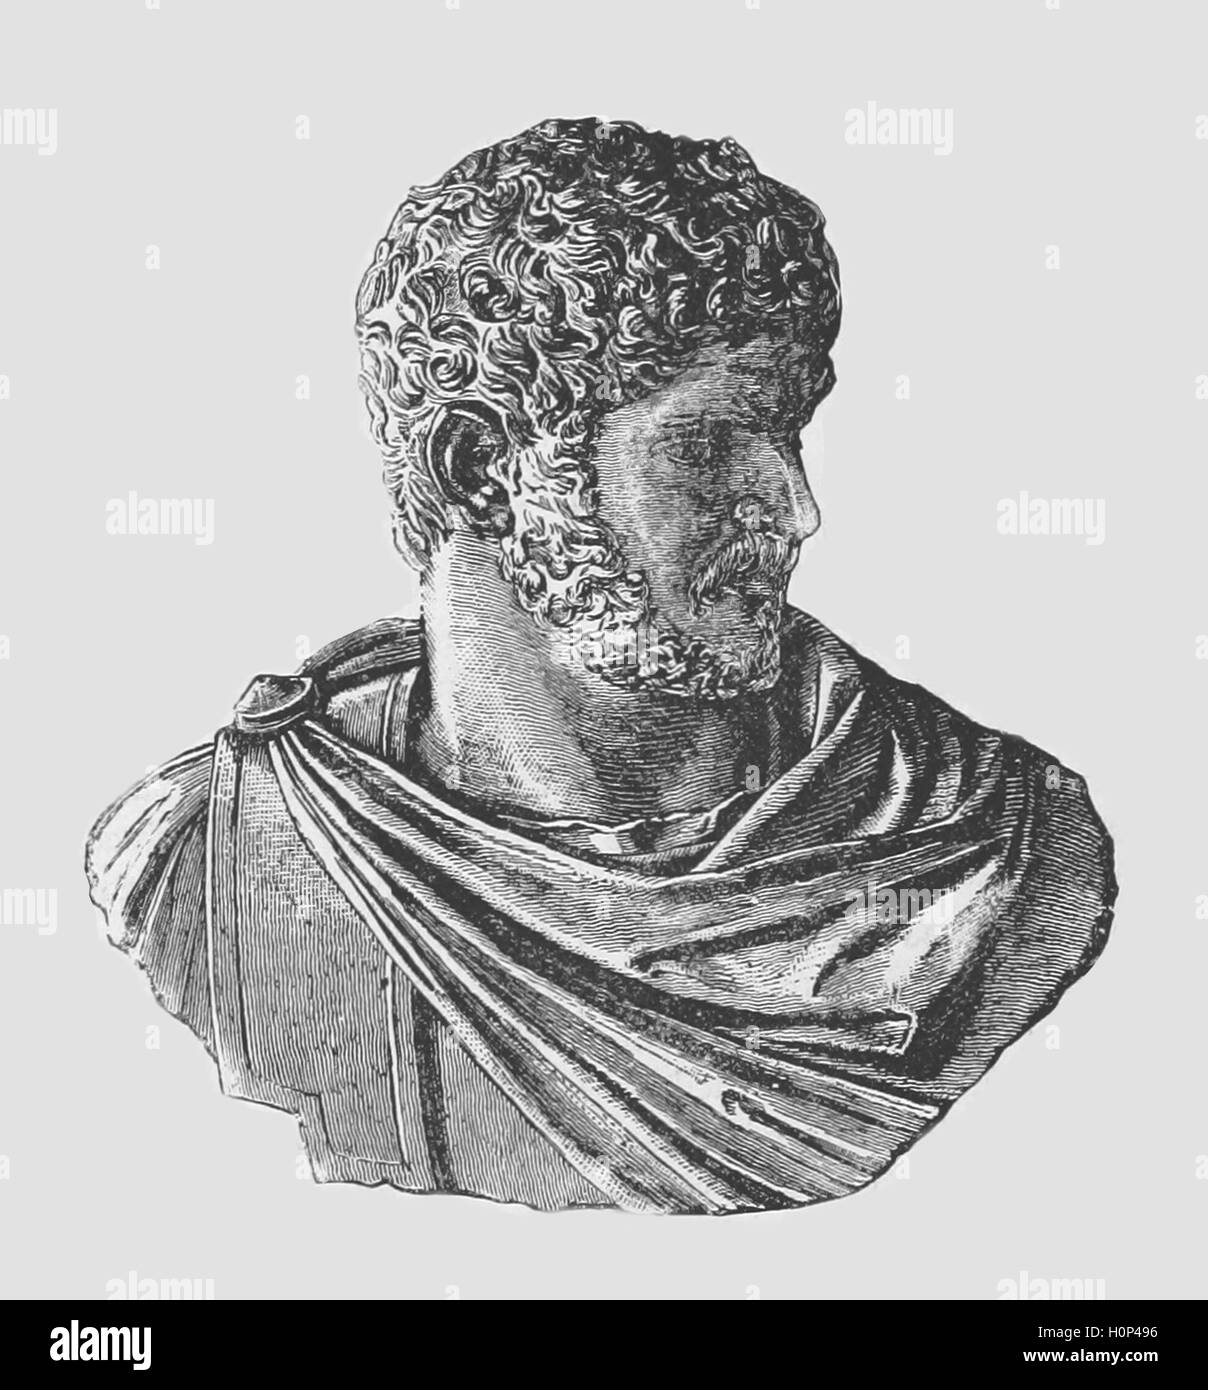 Roman emperor Caracalla, Marcus Aurelius Severus Antoninus Augustus.  He the Roman emperor from AD 198 to 217. A member of the Severan Dynasty, he was the eldest son of Septimius Severus and Julia Domna.   Image sourced from Cassell's Illustrated Universal History (1893). Stock Photo